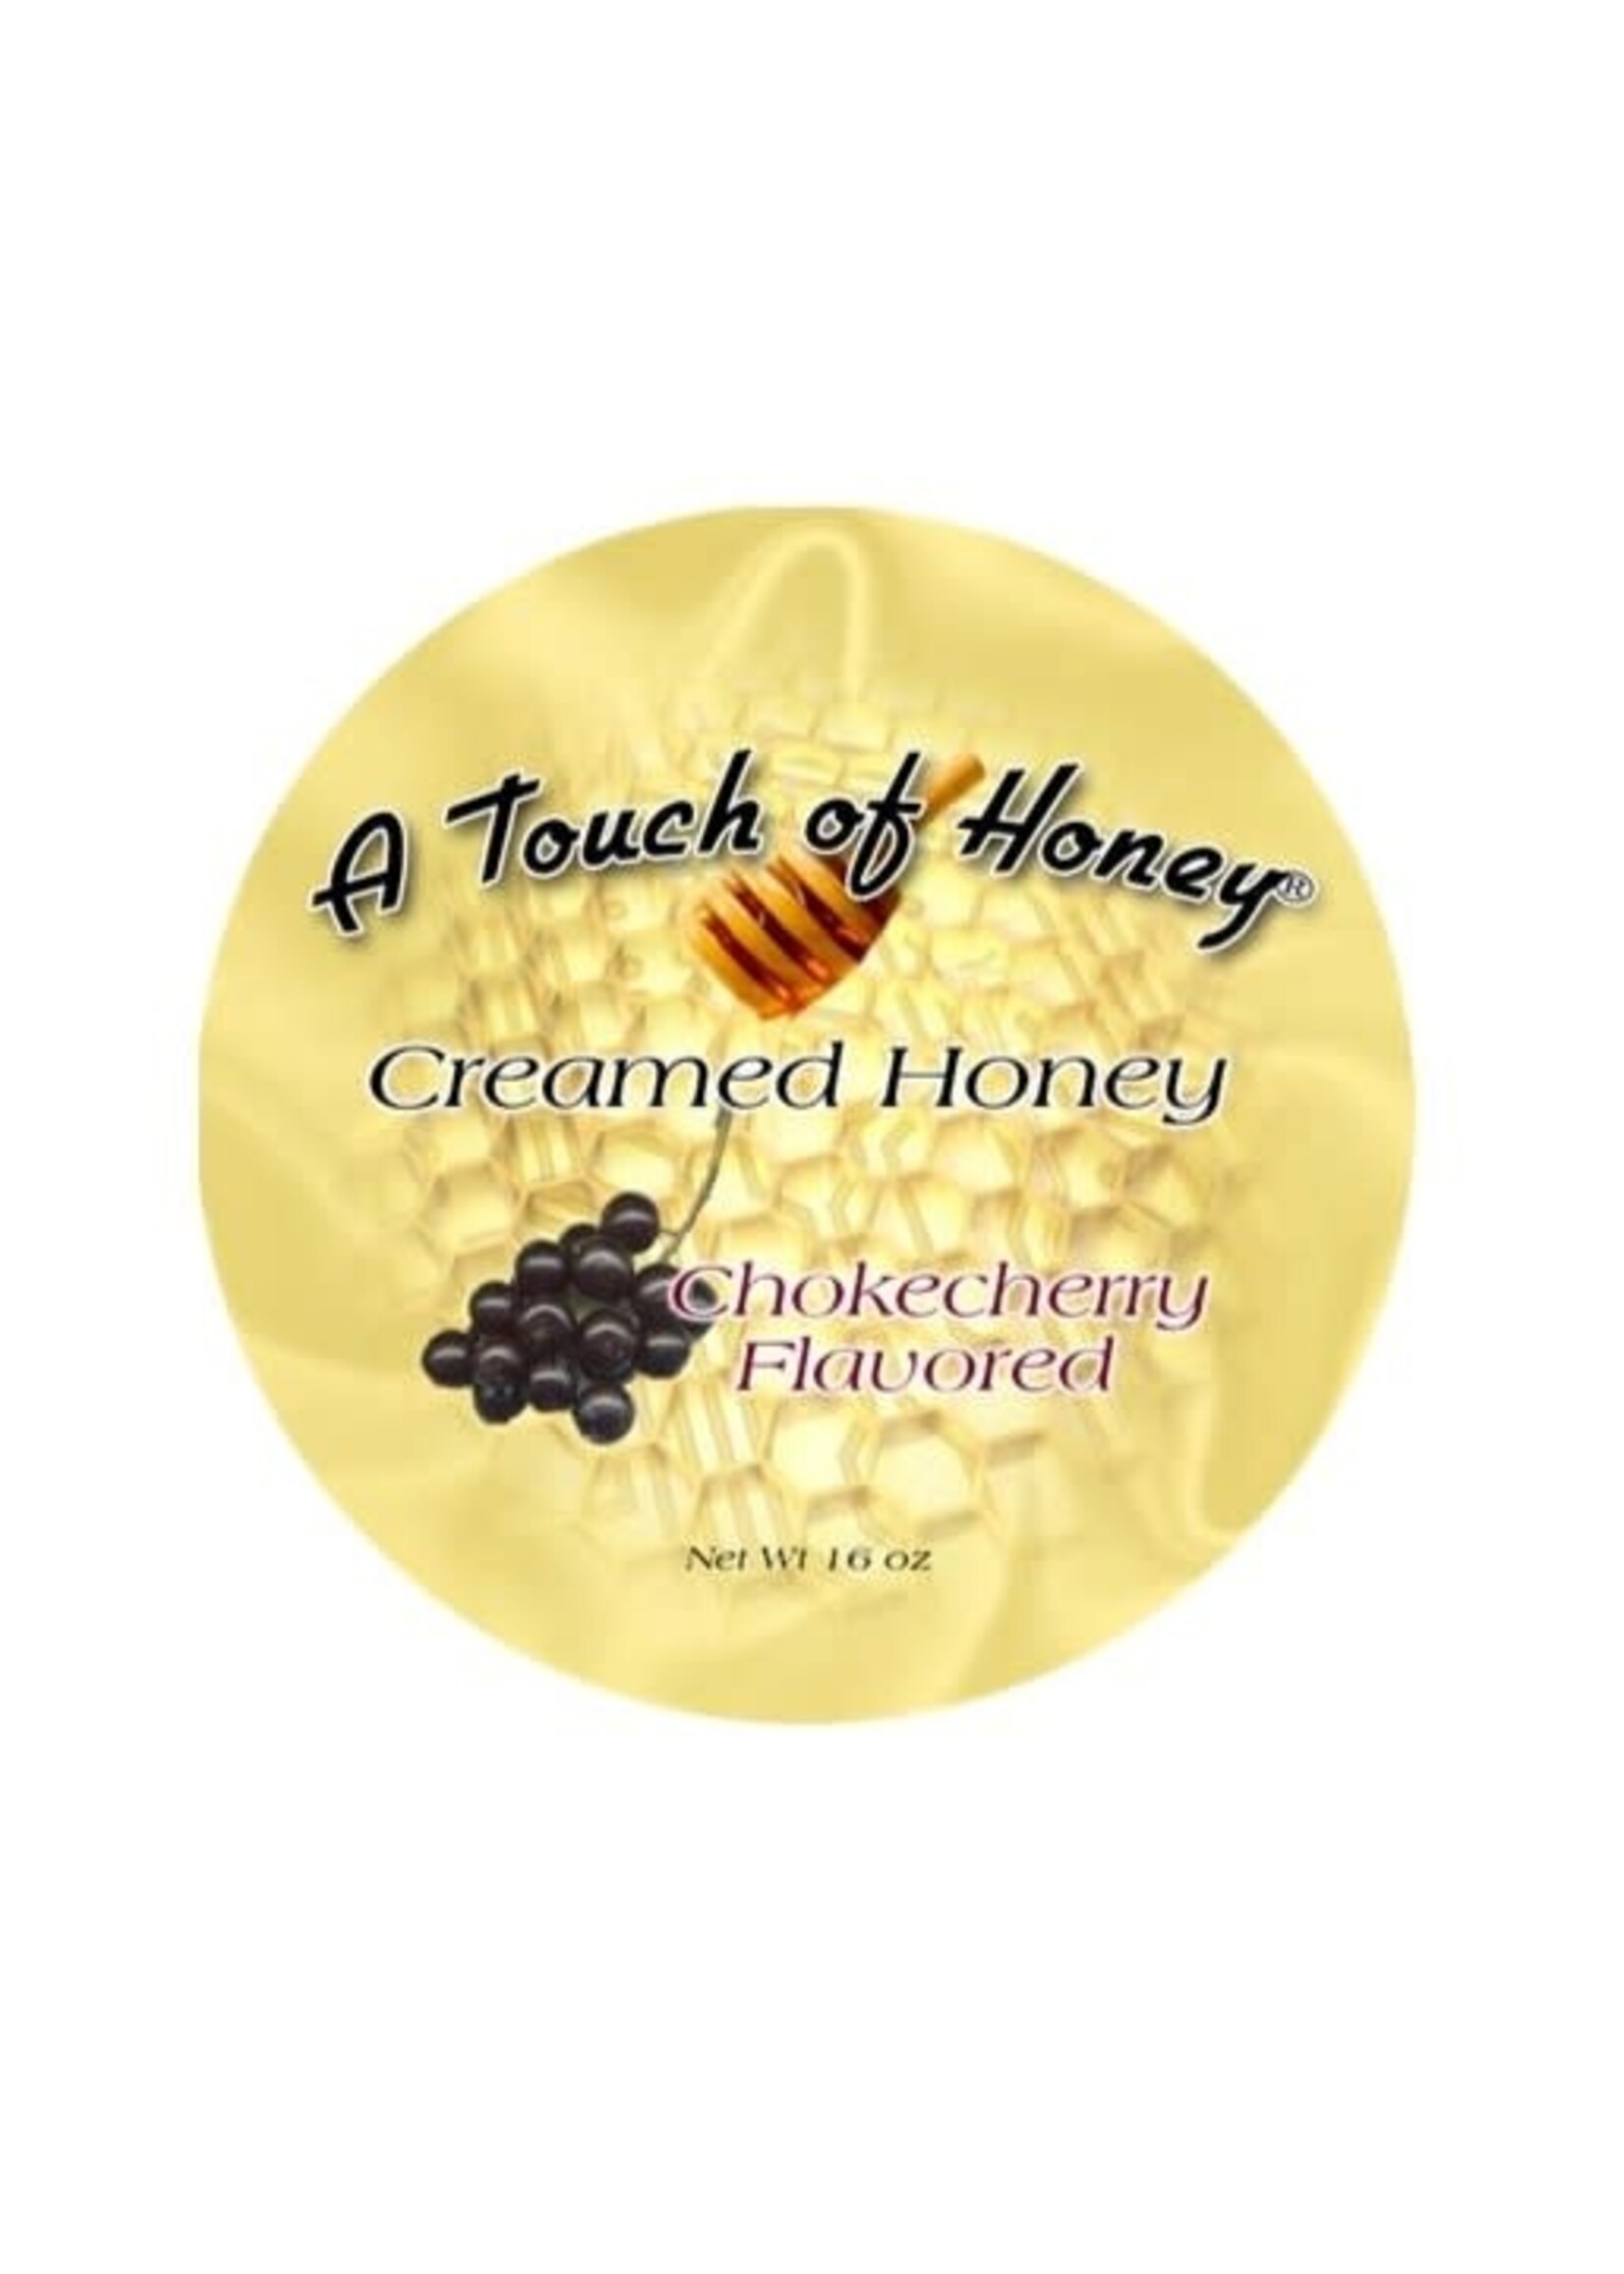 A Touch of Honey Chokecherry Flavored Creamed Honey